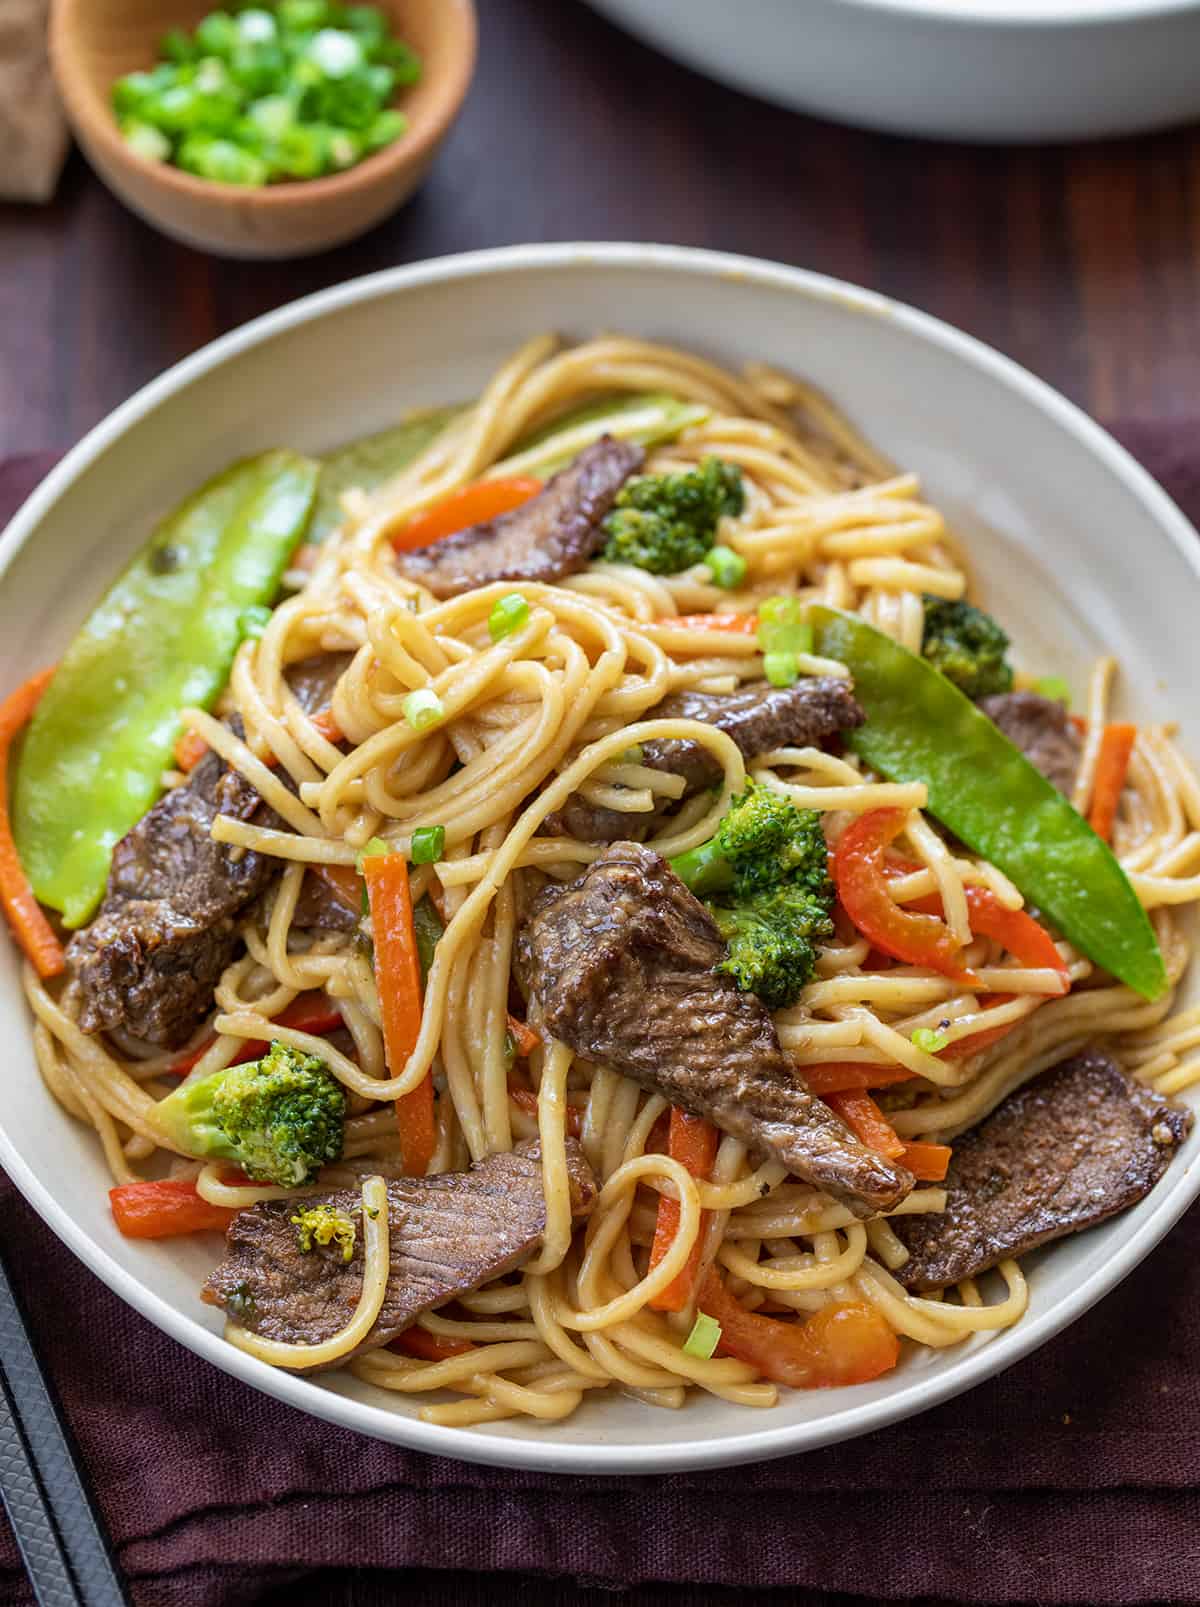 Plate of Beef Lo Mein on a Dark Napkin.